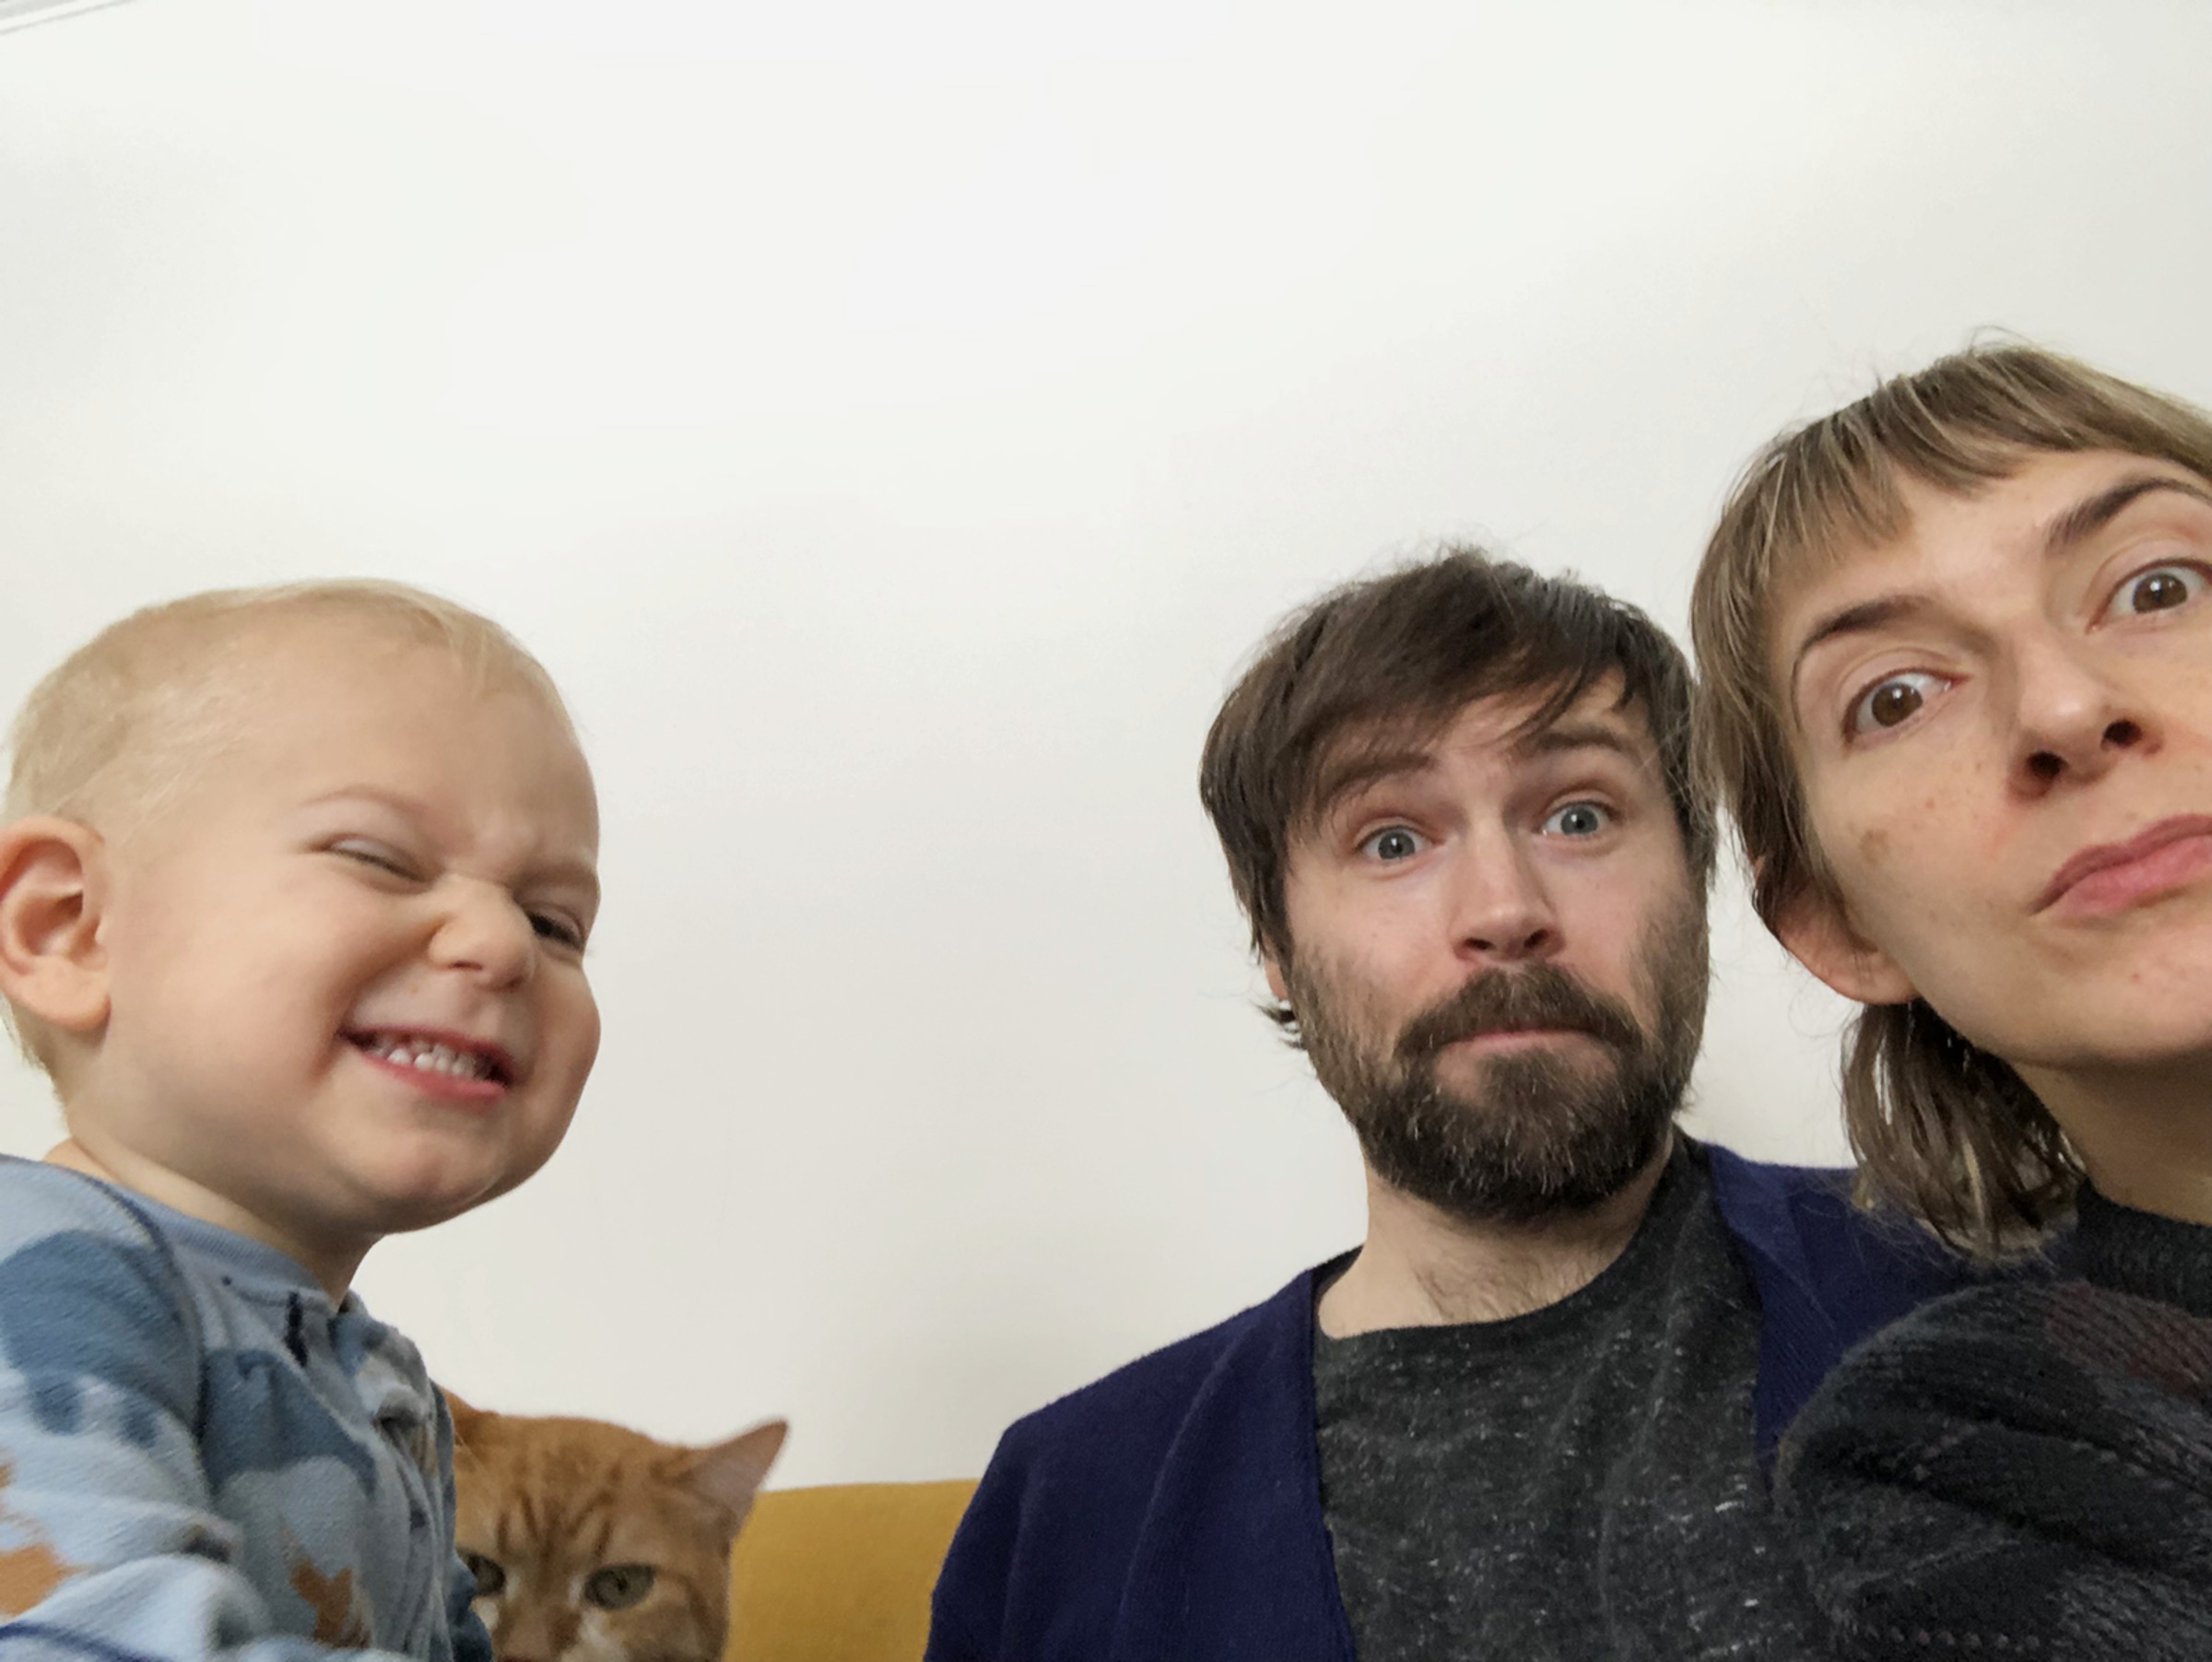 A family selfie from February. (Courtesy Rebekah Taussig)